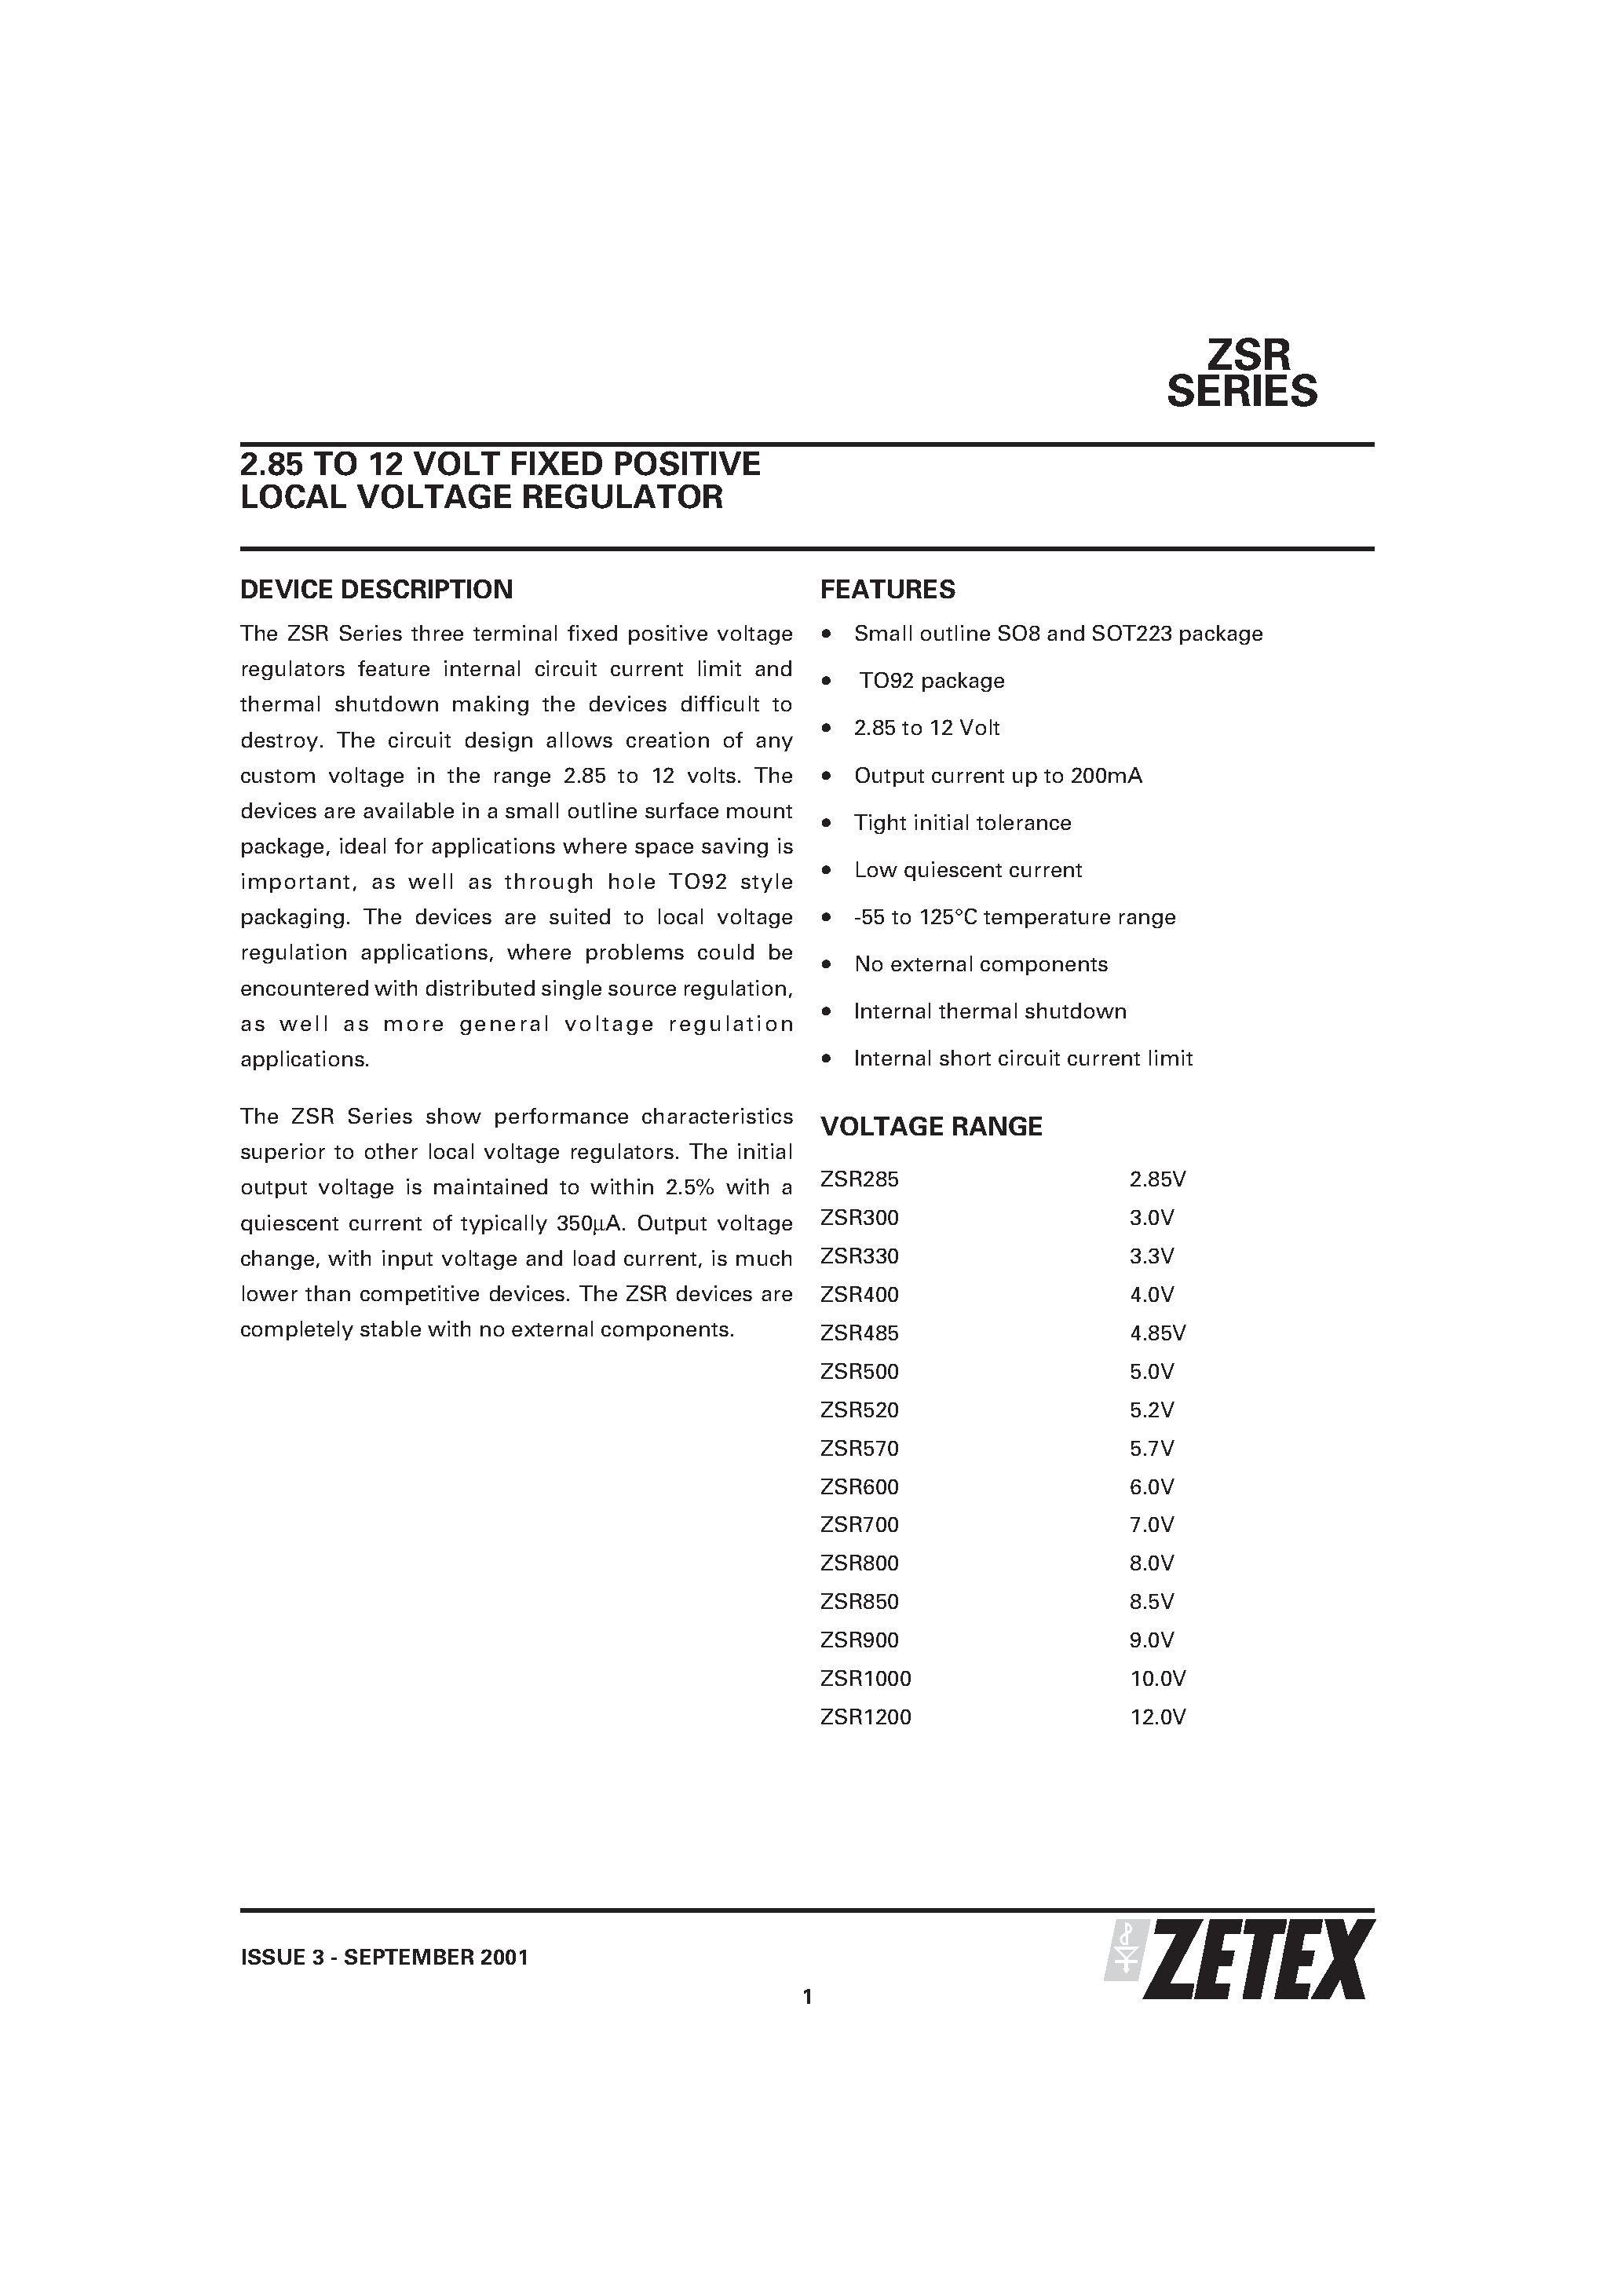 Datasheet ZSR1200N8 - 2.85 TO 12 VOLT FIXED POSITIVE LOCAL VOLTAGE REGULATOR page 1